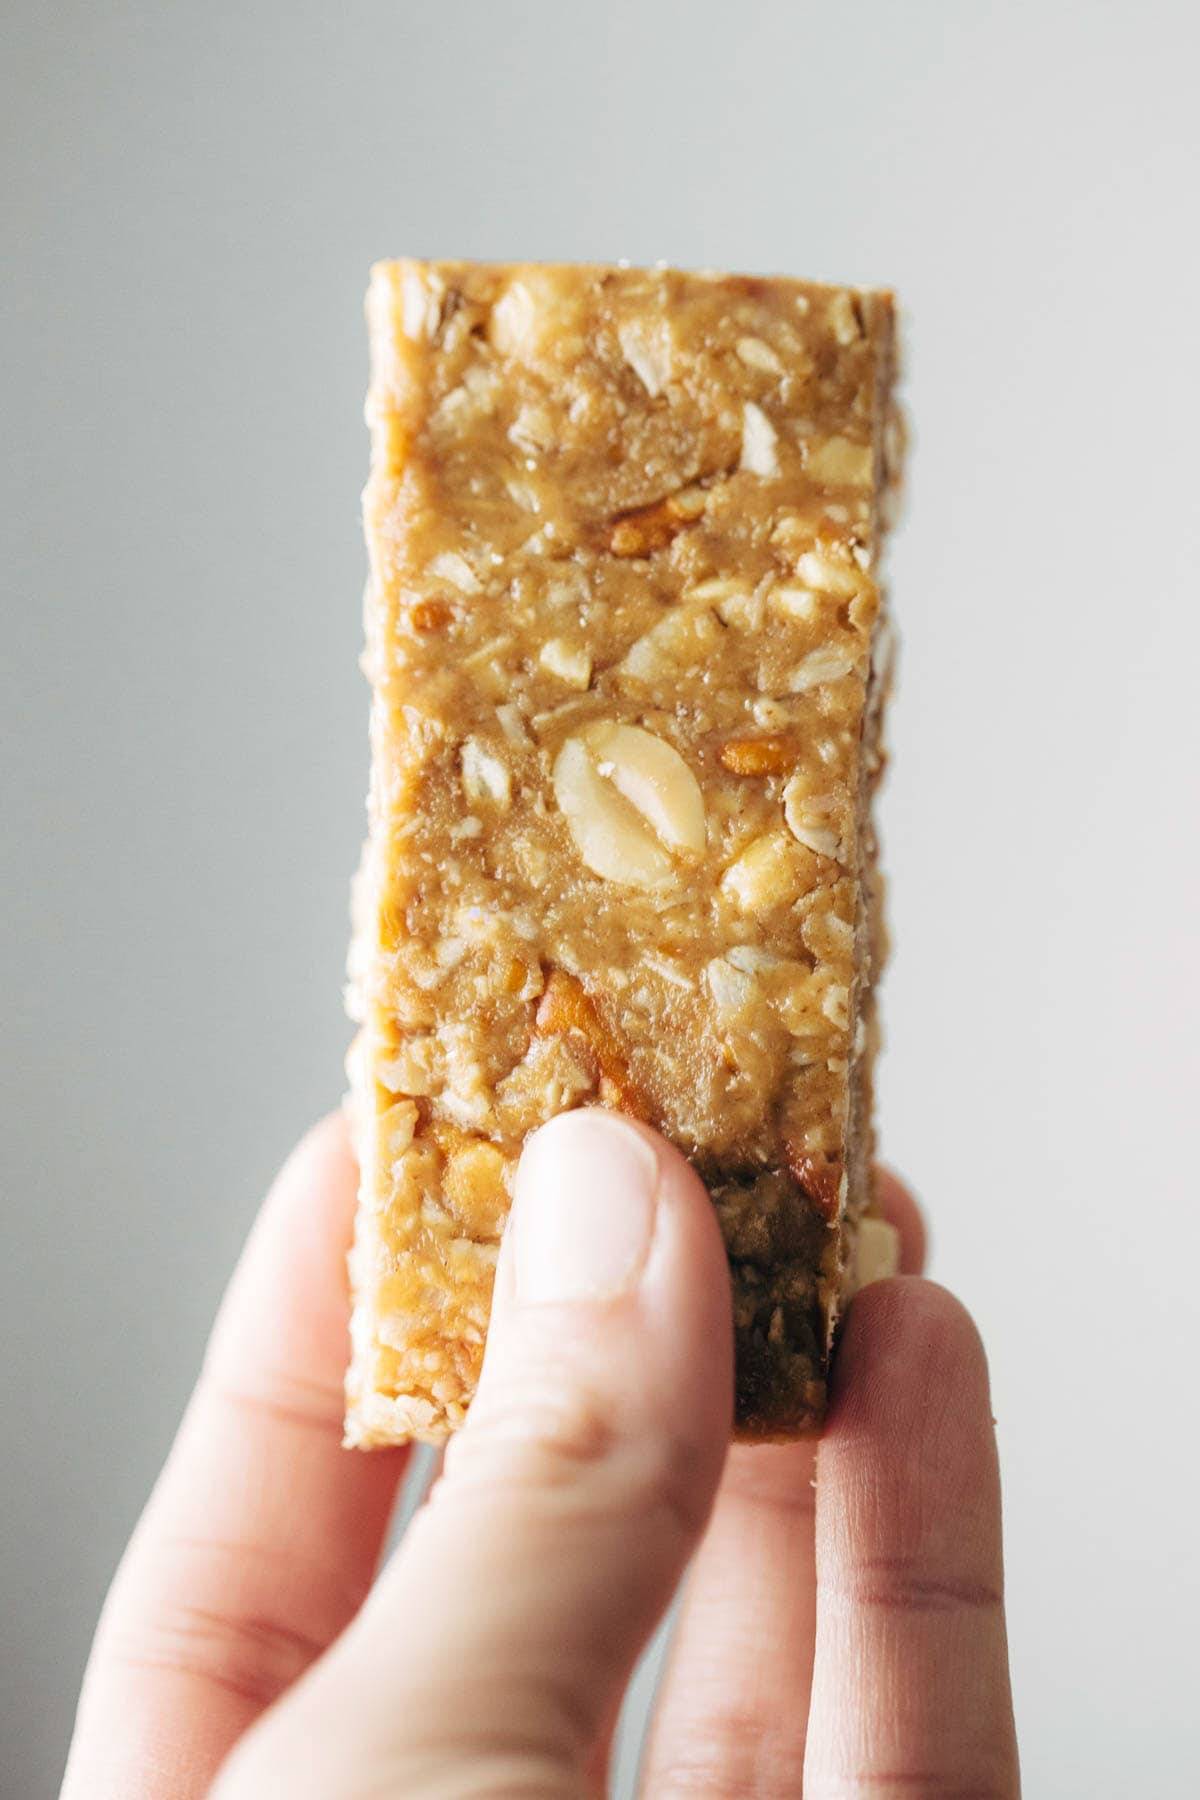 Soft granola bar held by hand.